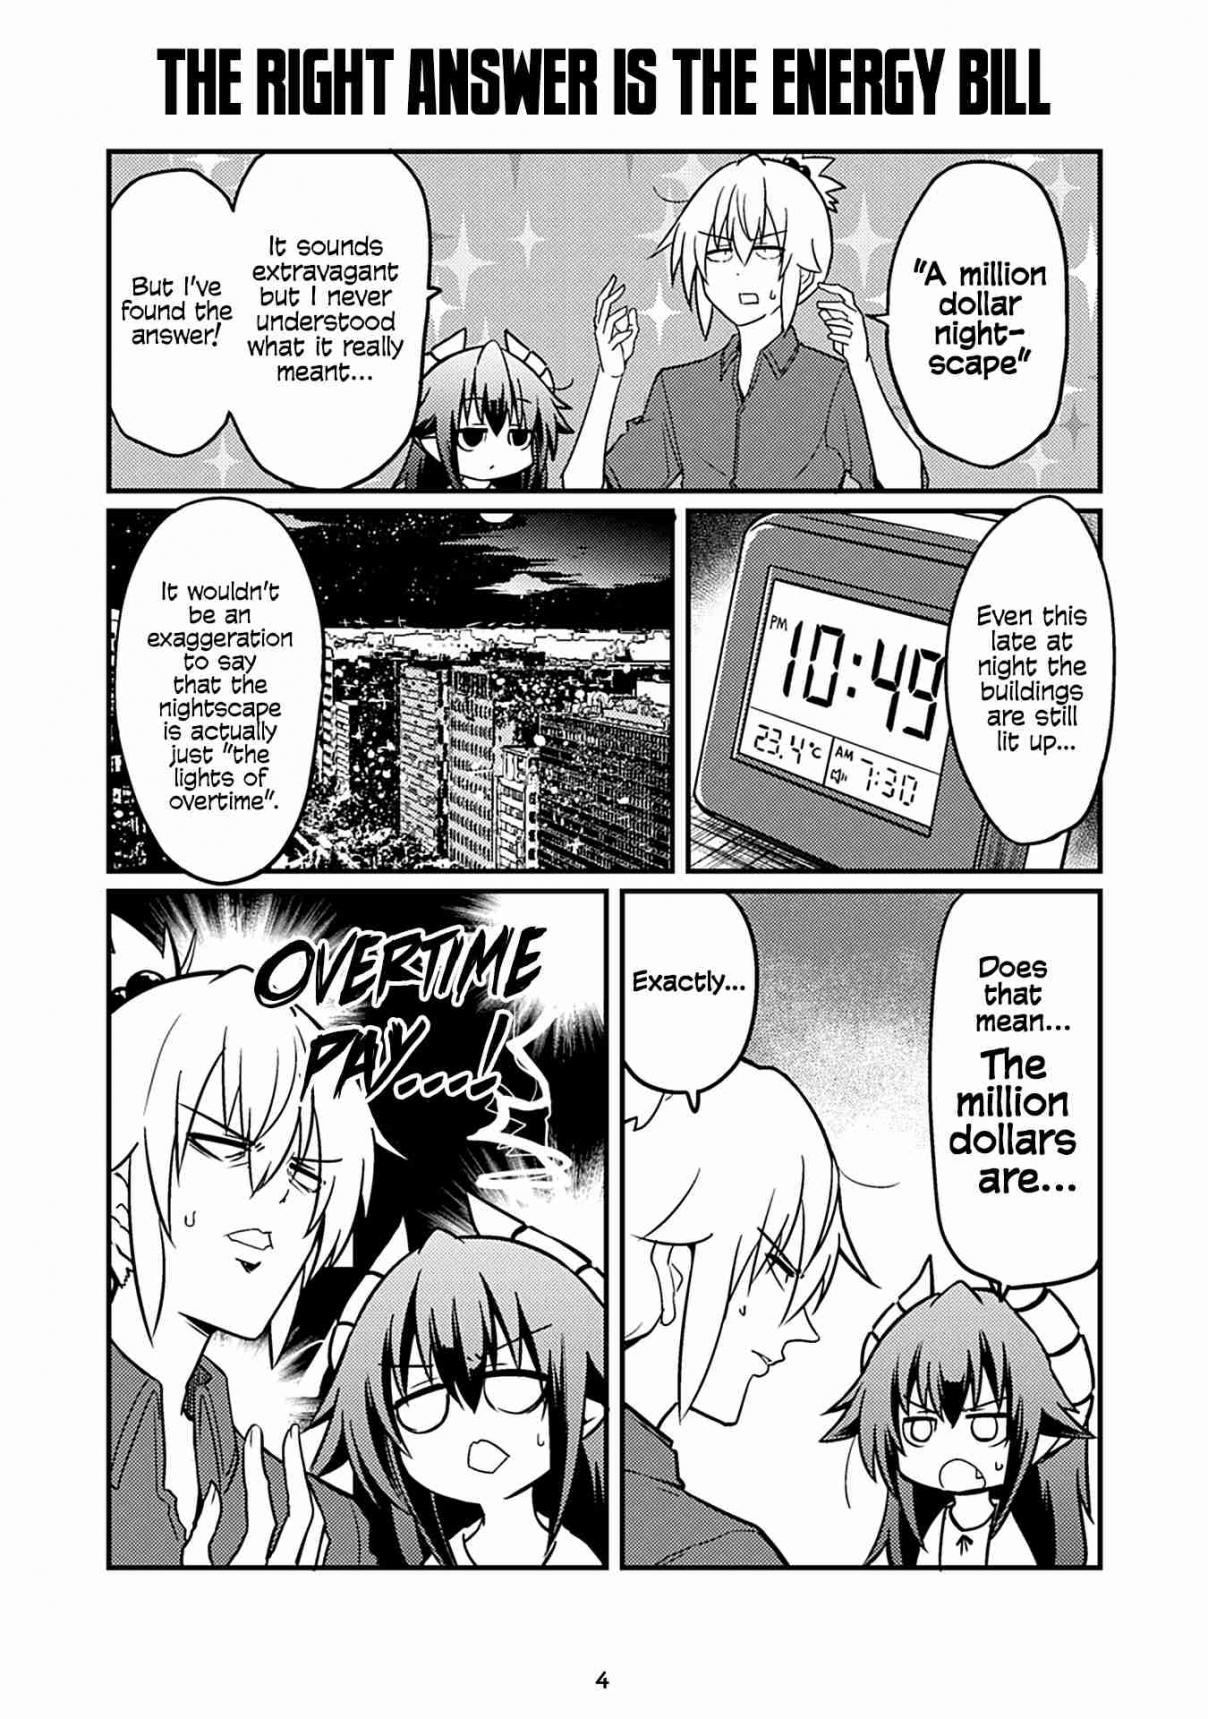 Naughty Succubus "Saki chan" Vol. 2 Ch. 100 The right answer is the energy bill